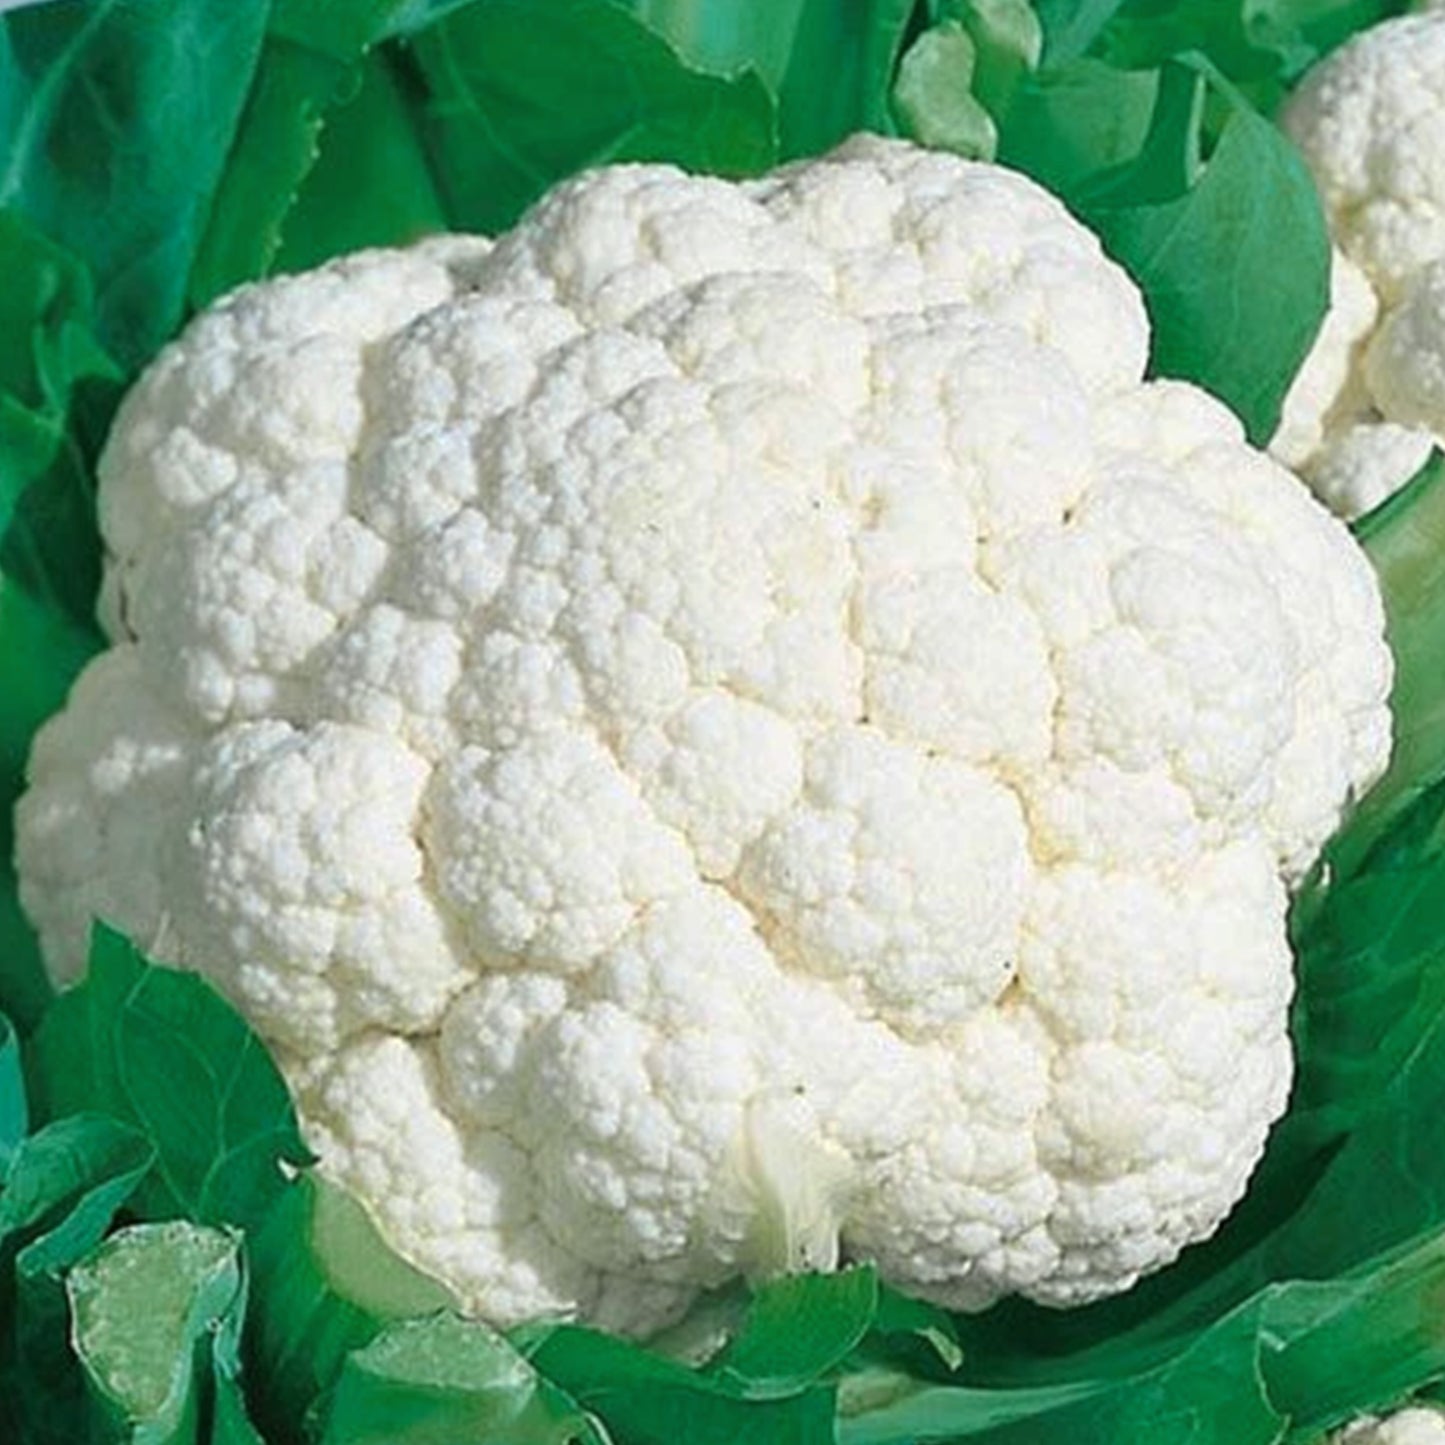 Snow Crown Cauliflower plants live baby plants from Ferry Morse. Picture shows mature cauliflower plant.